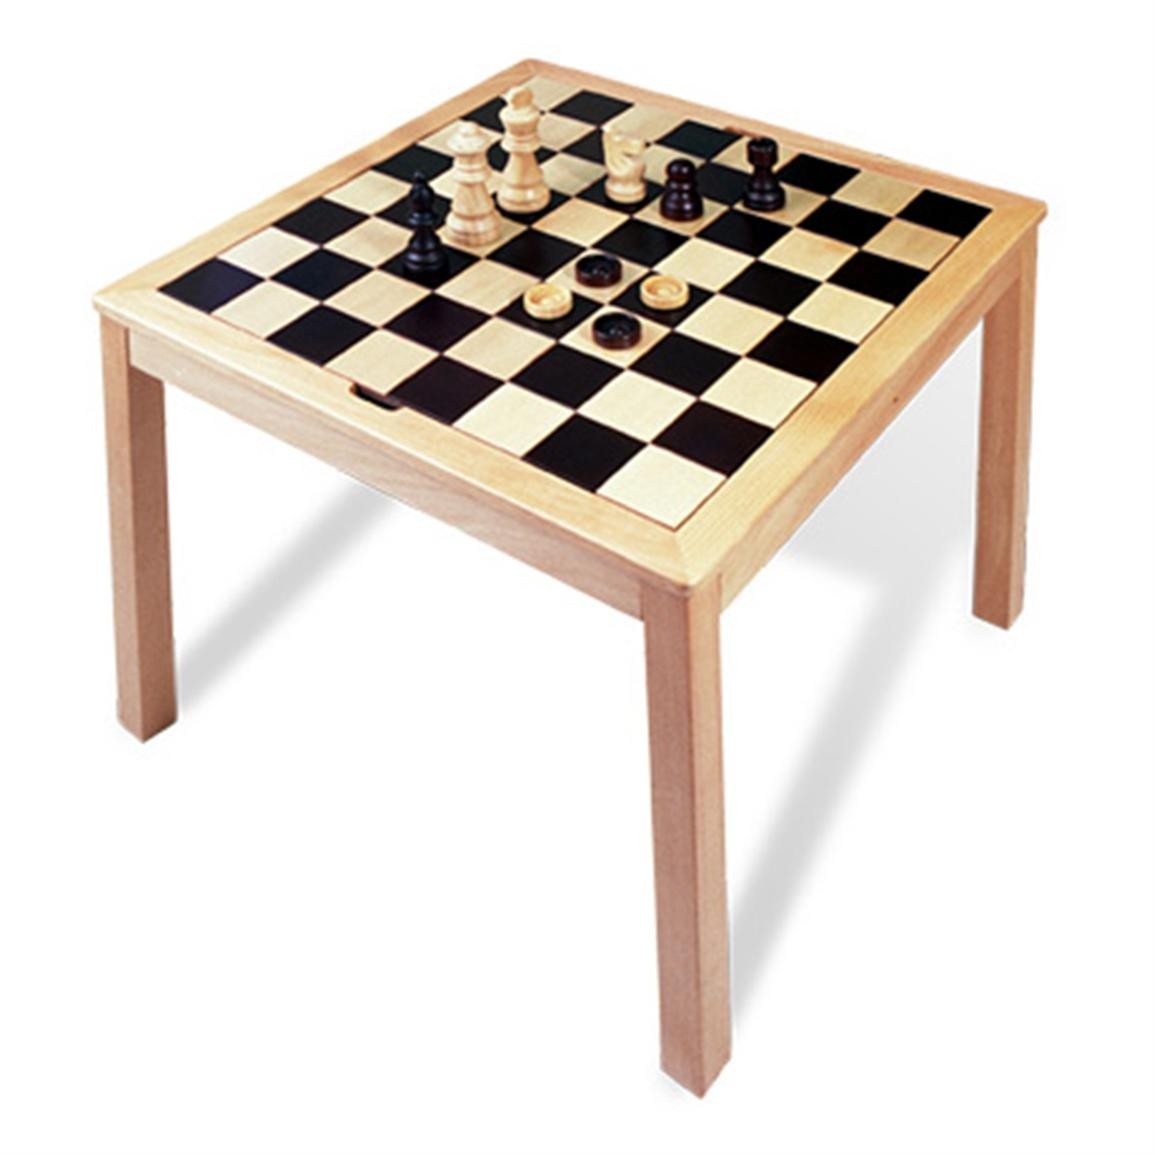 Sunnywood wooden chess checkers backgammon table